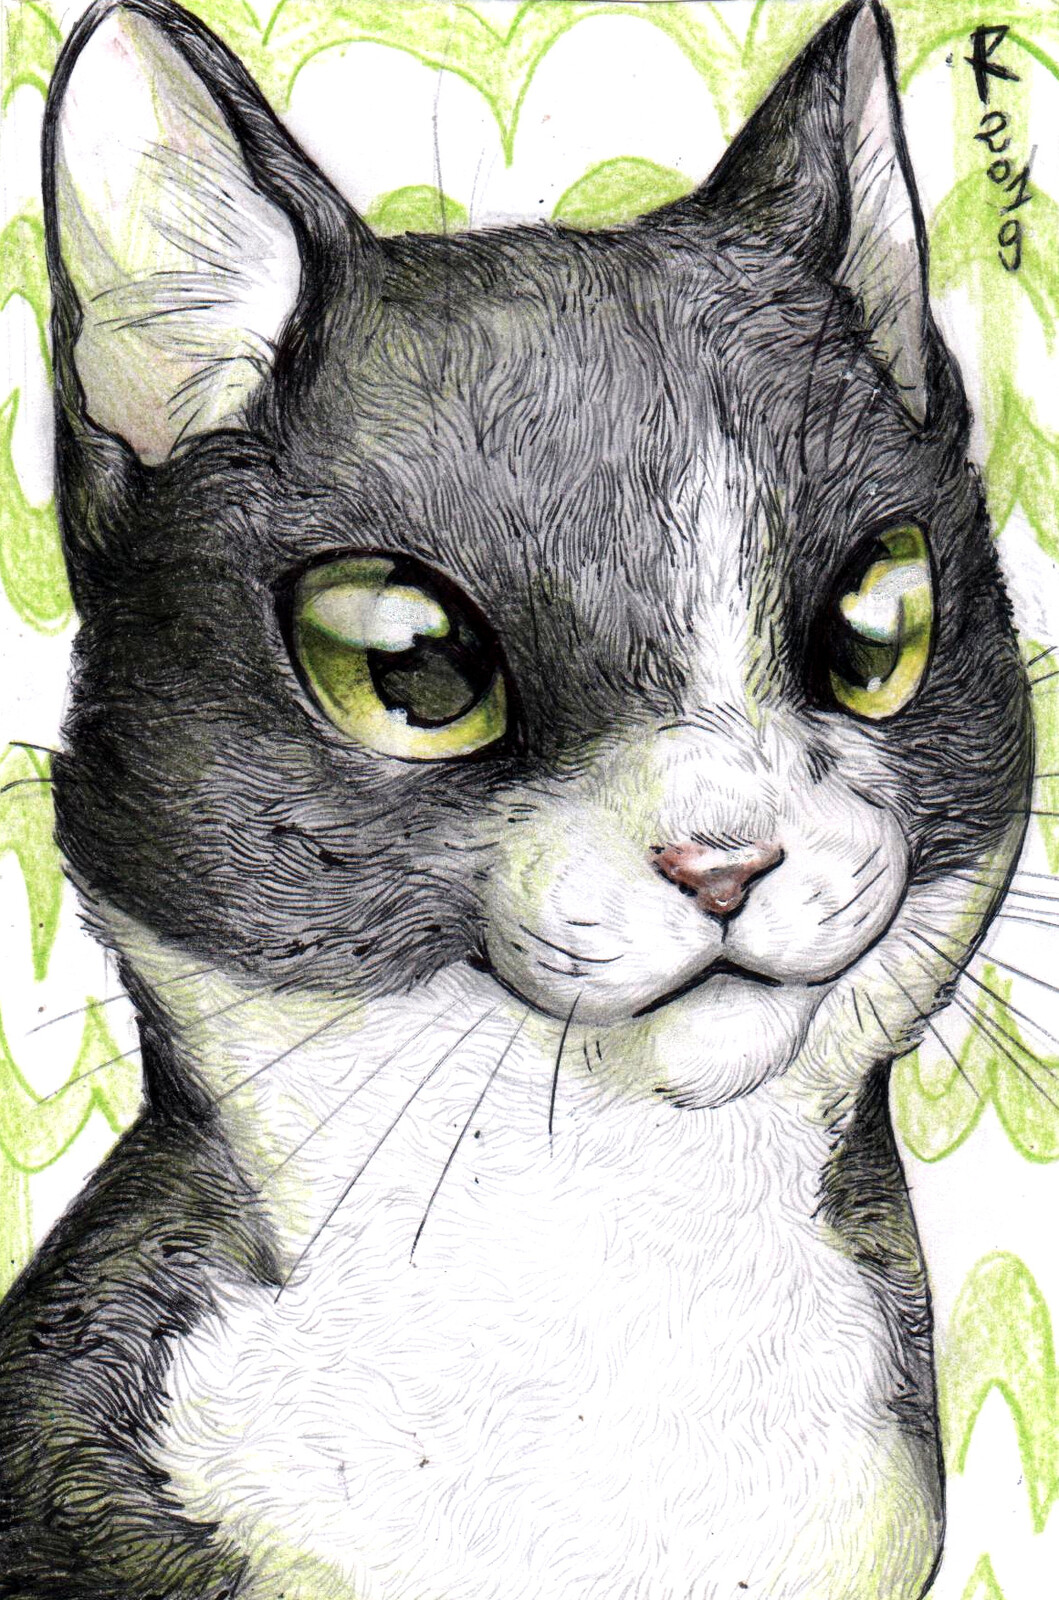 Another ArtFight attack! Portrait of Amy, a beautiful black and wjite cat that belongs to Smilofelinae. Drawn with colored pencils and pen.
